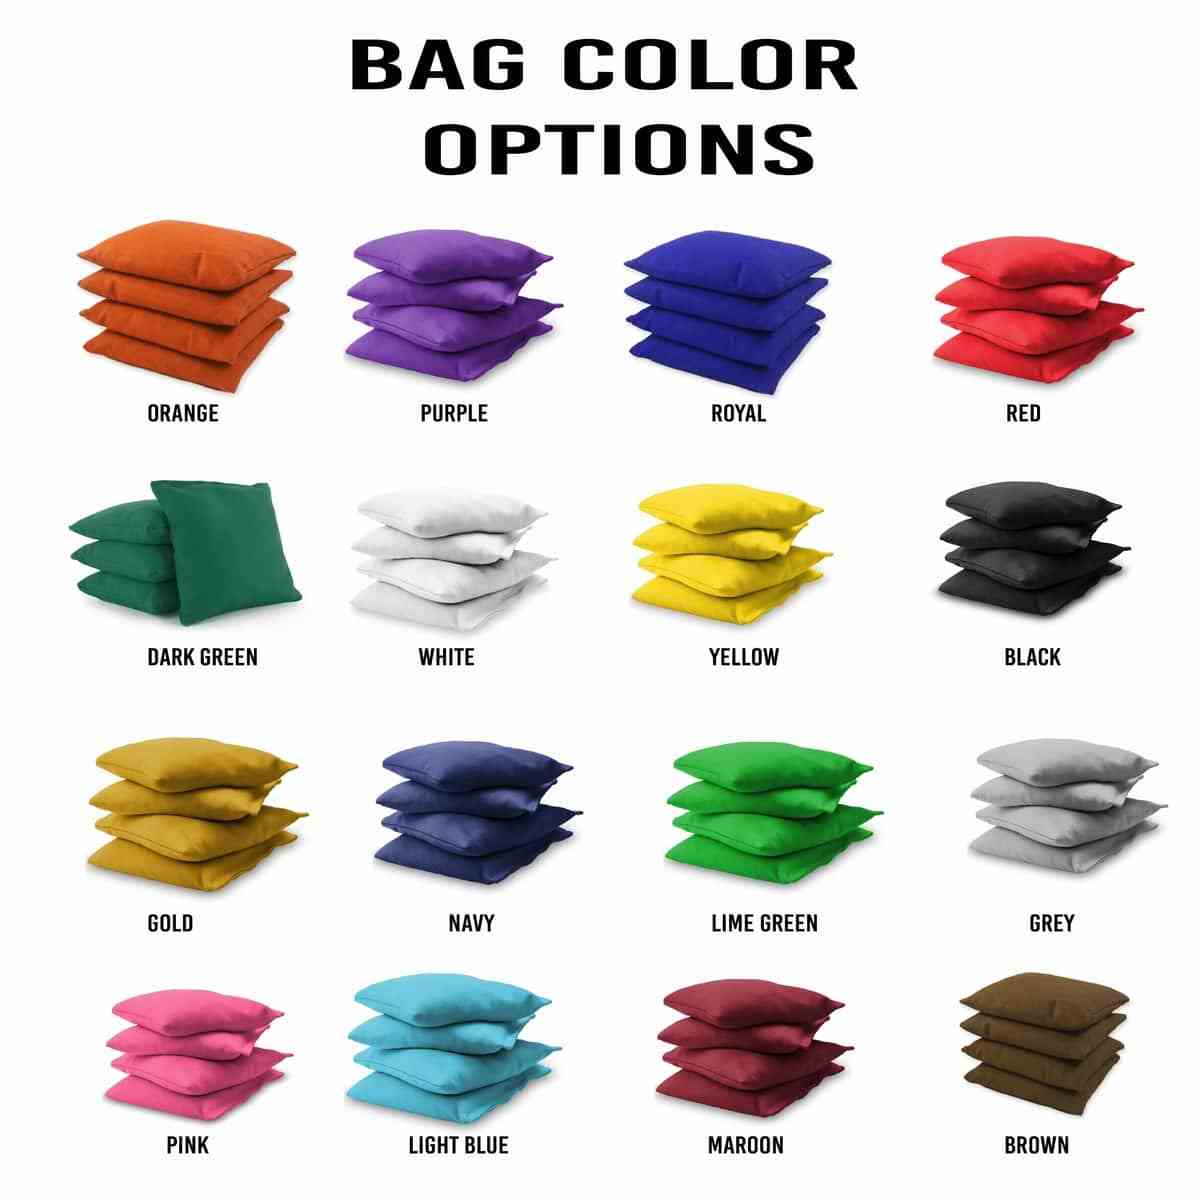 Family bag colors